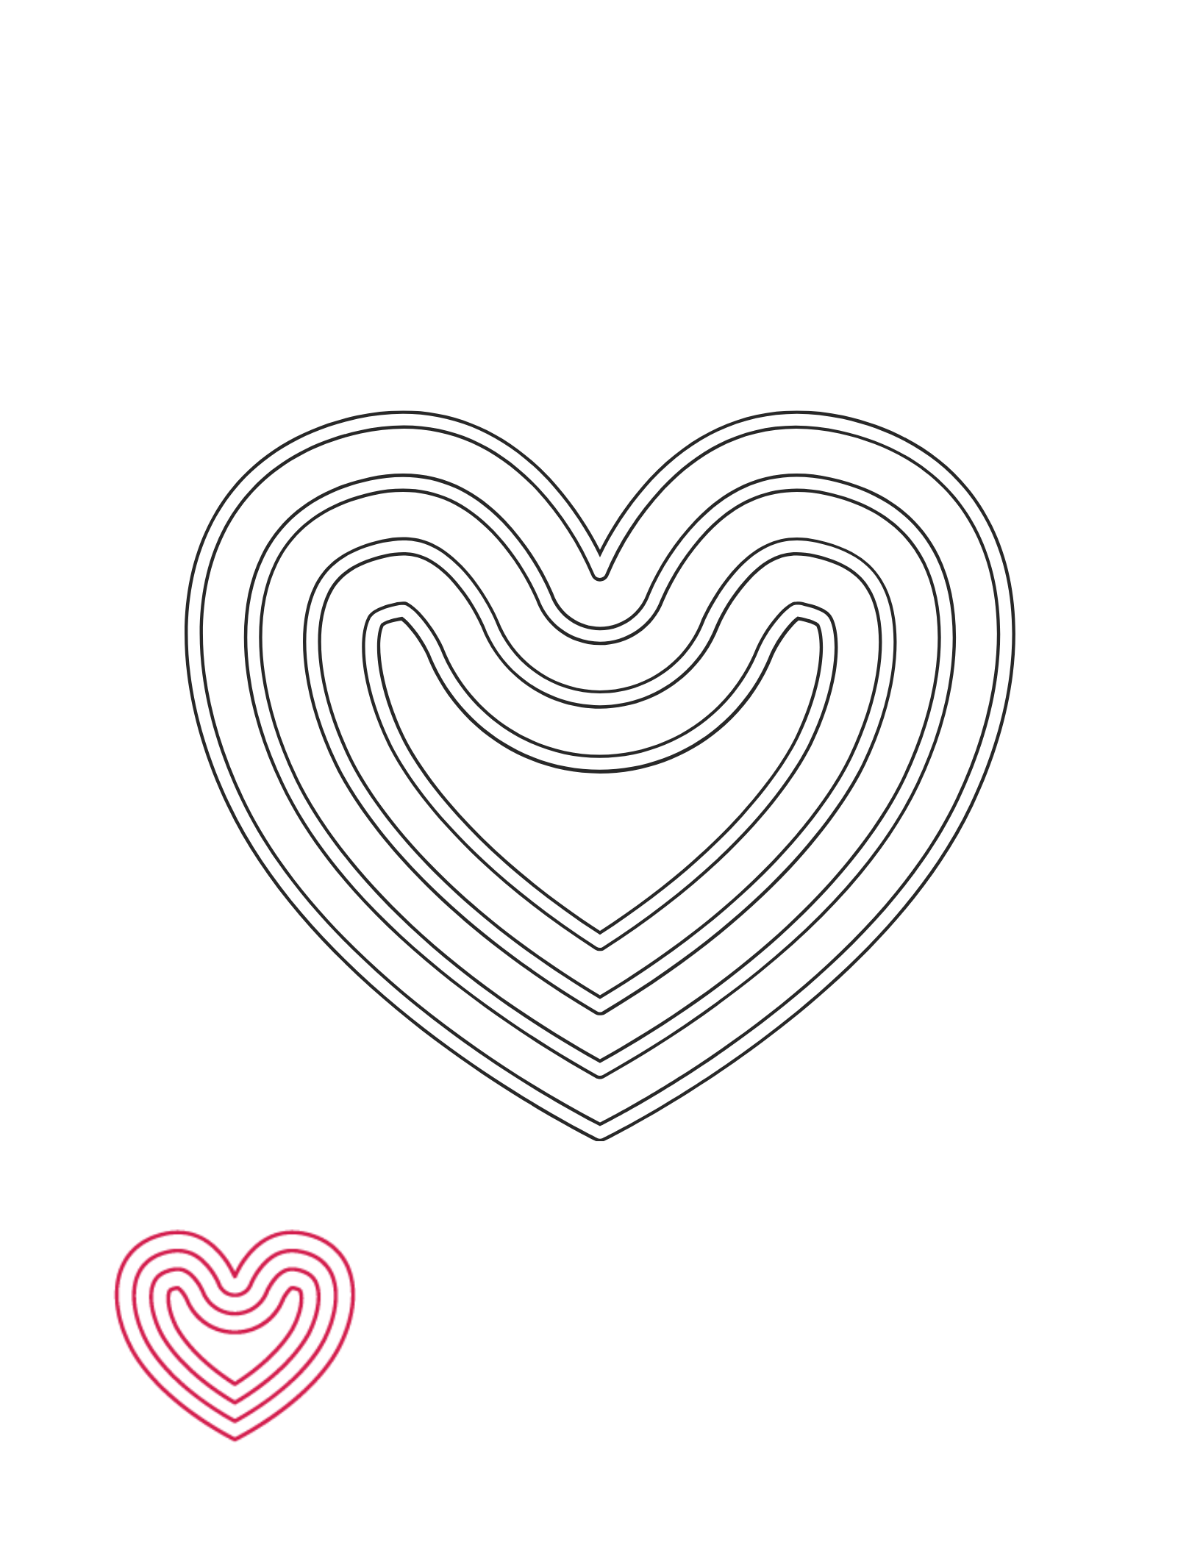 Heart Outline Coloring Page Template